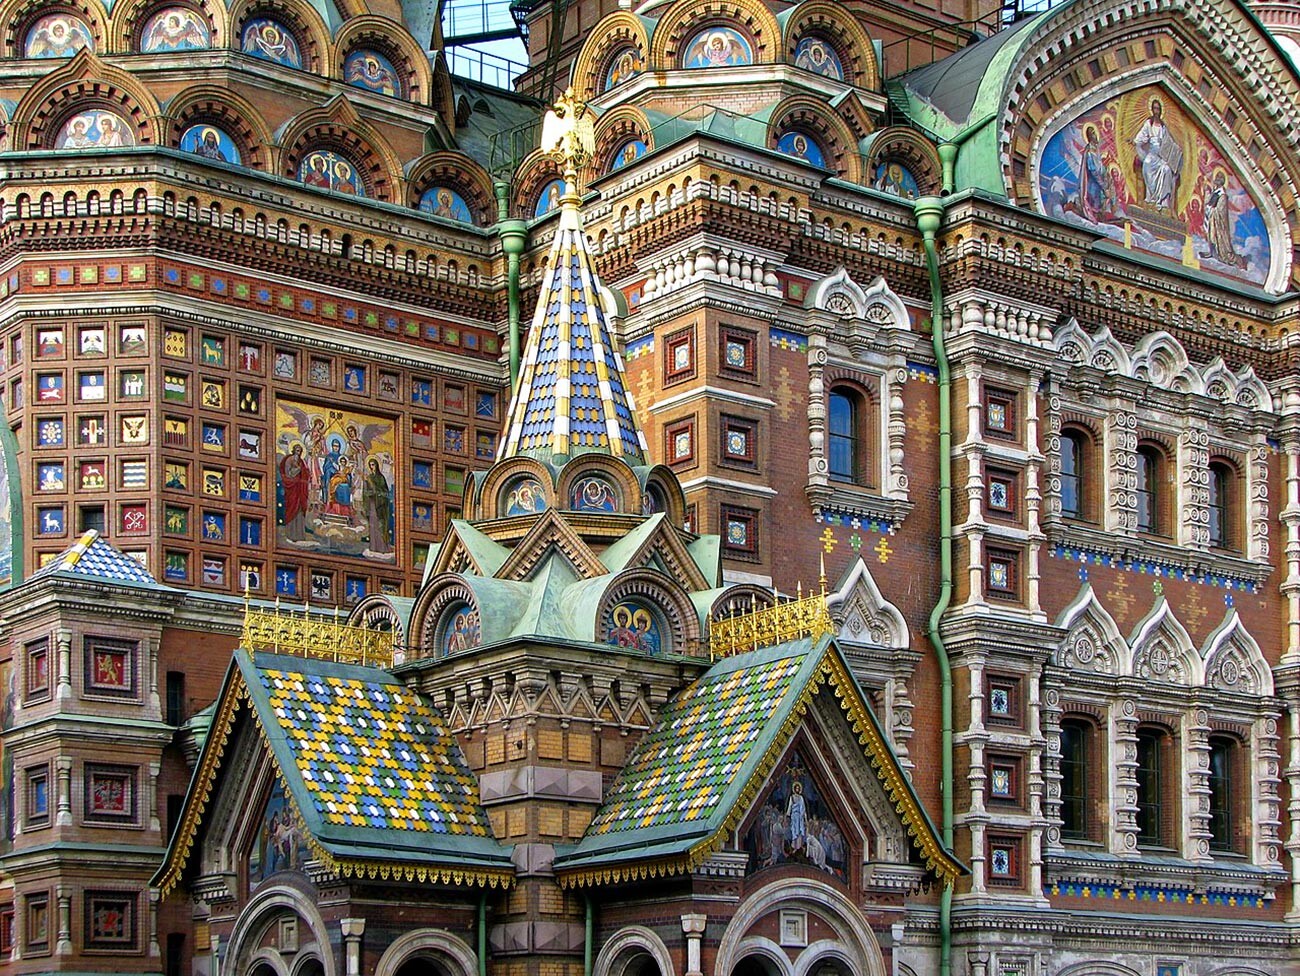  The Church of the Savior on Spilled Blood.